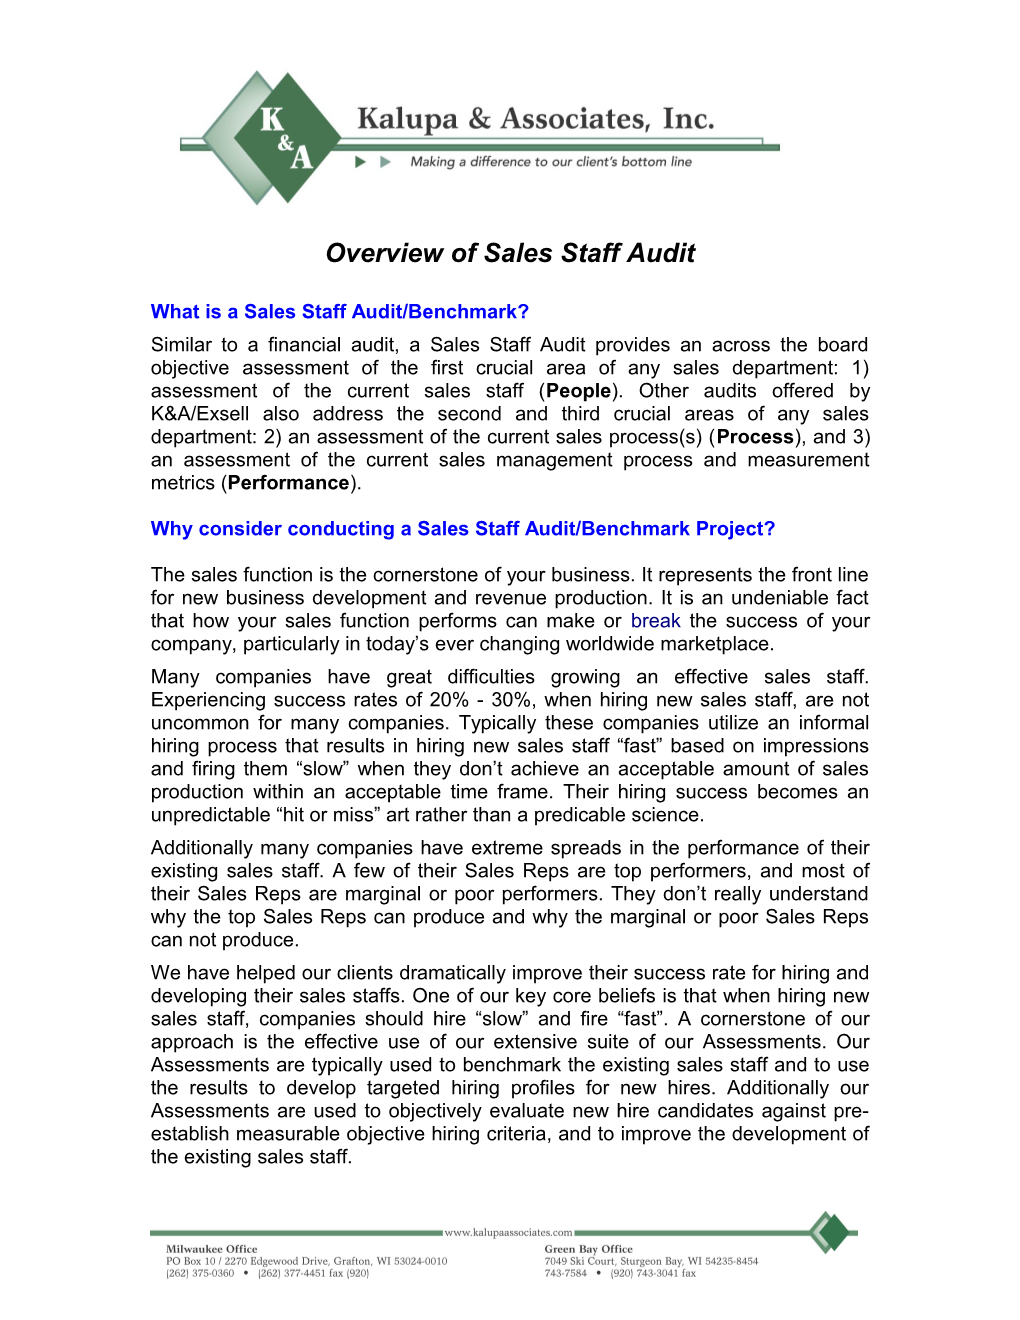 Overview of Sales Staff Audit